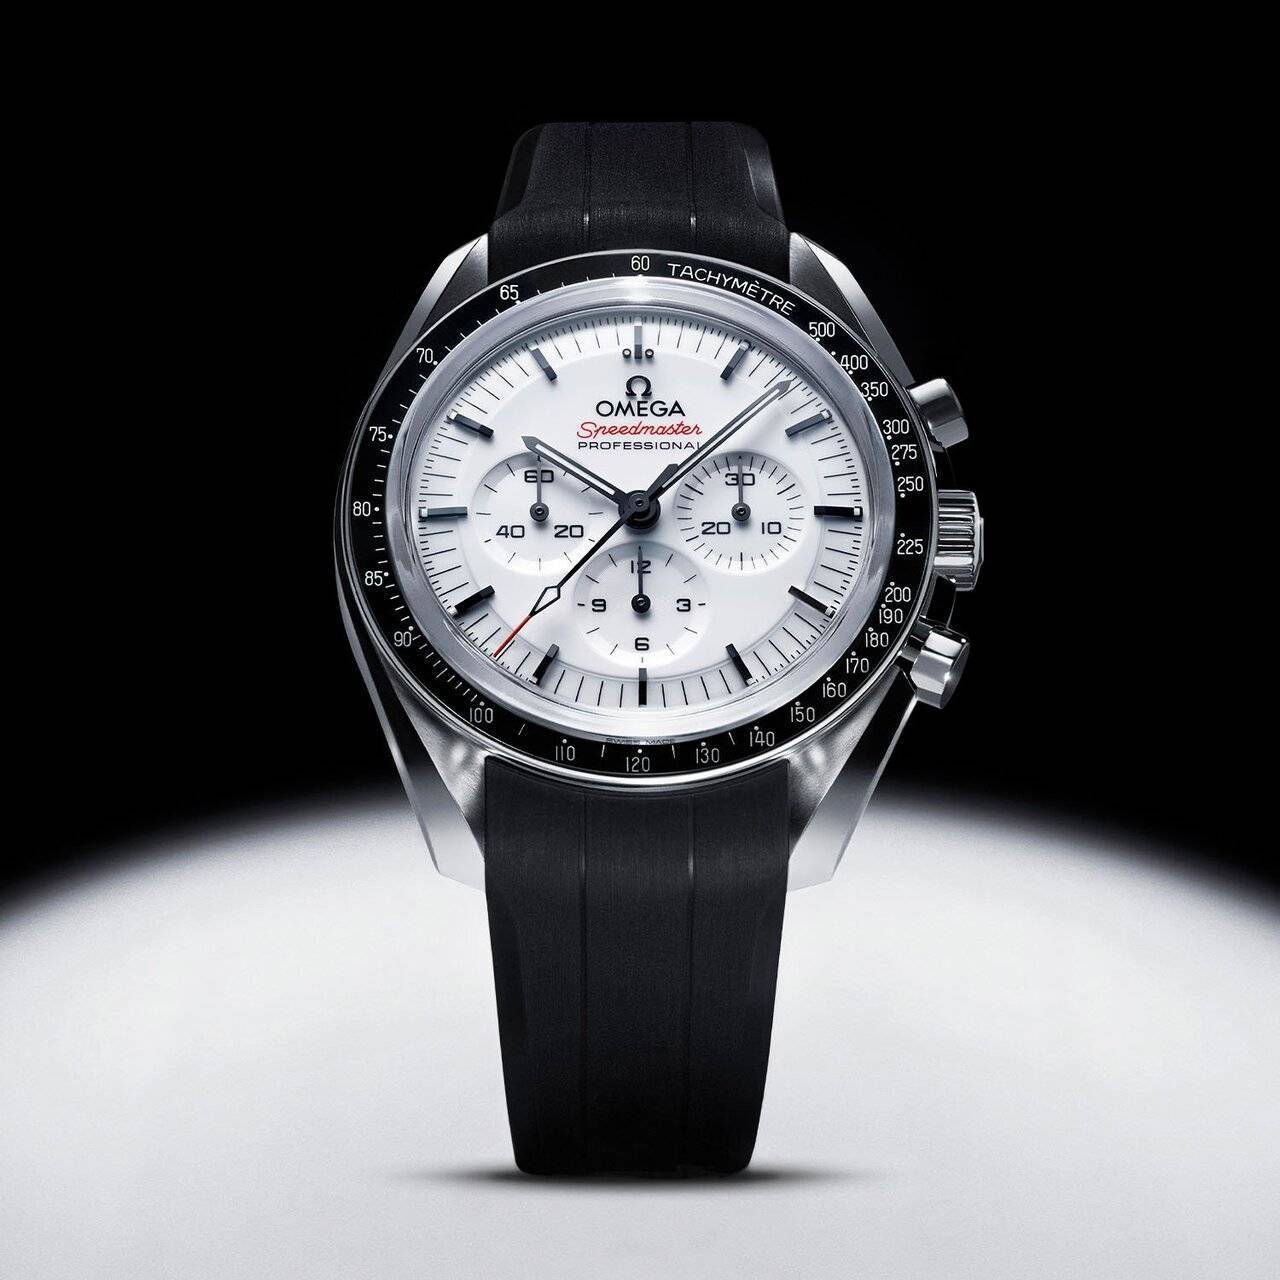 Omega-Speedmaster-Moonwatch-Professional-White-Dial-Lacquered-310.32.42.50.04.002.jpg